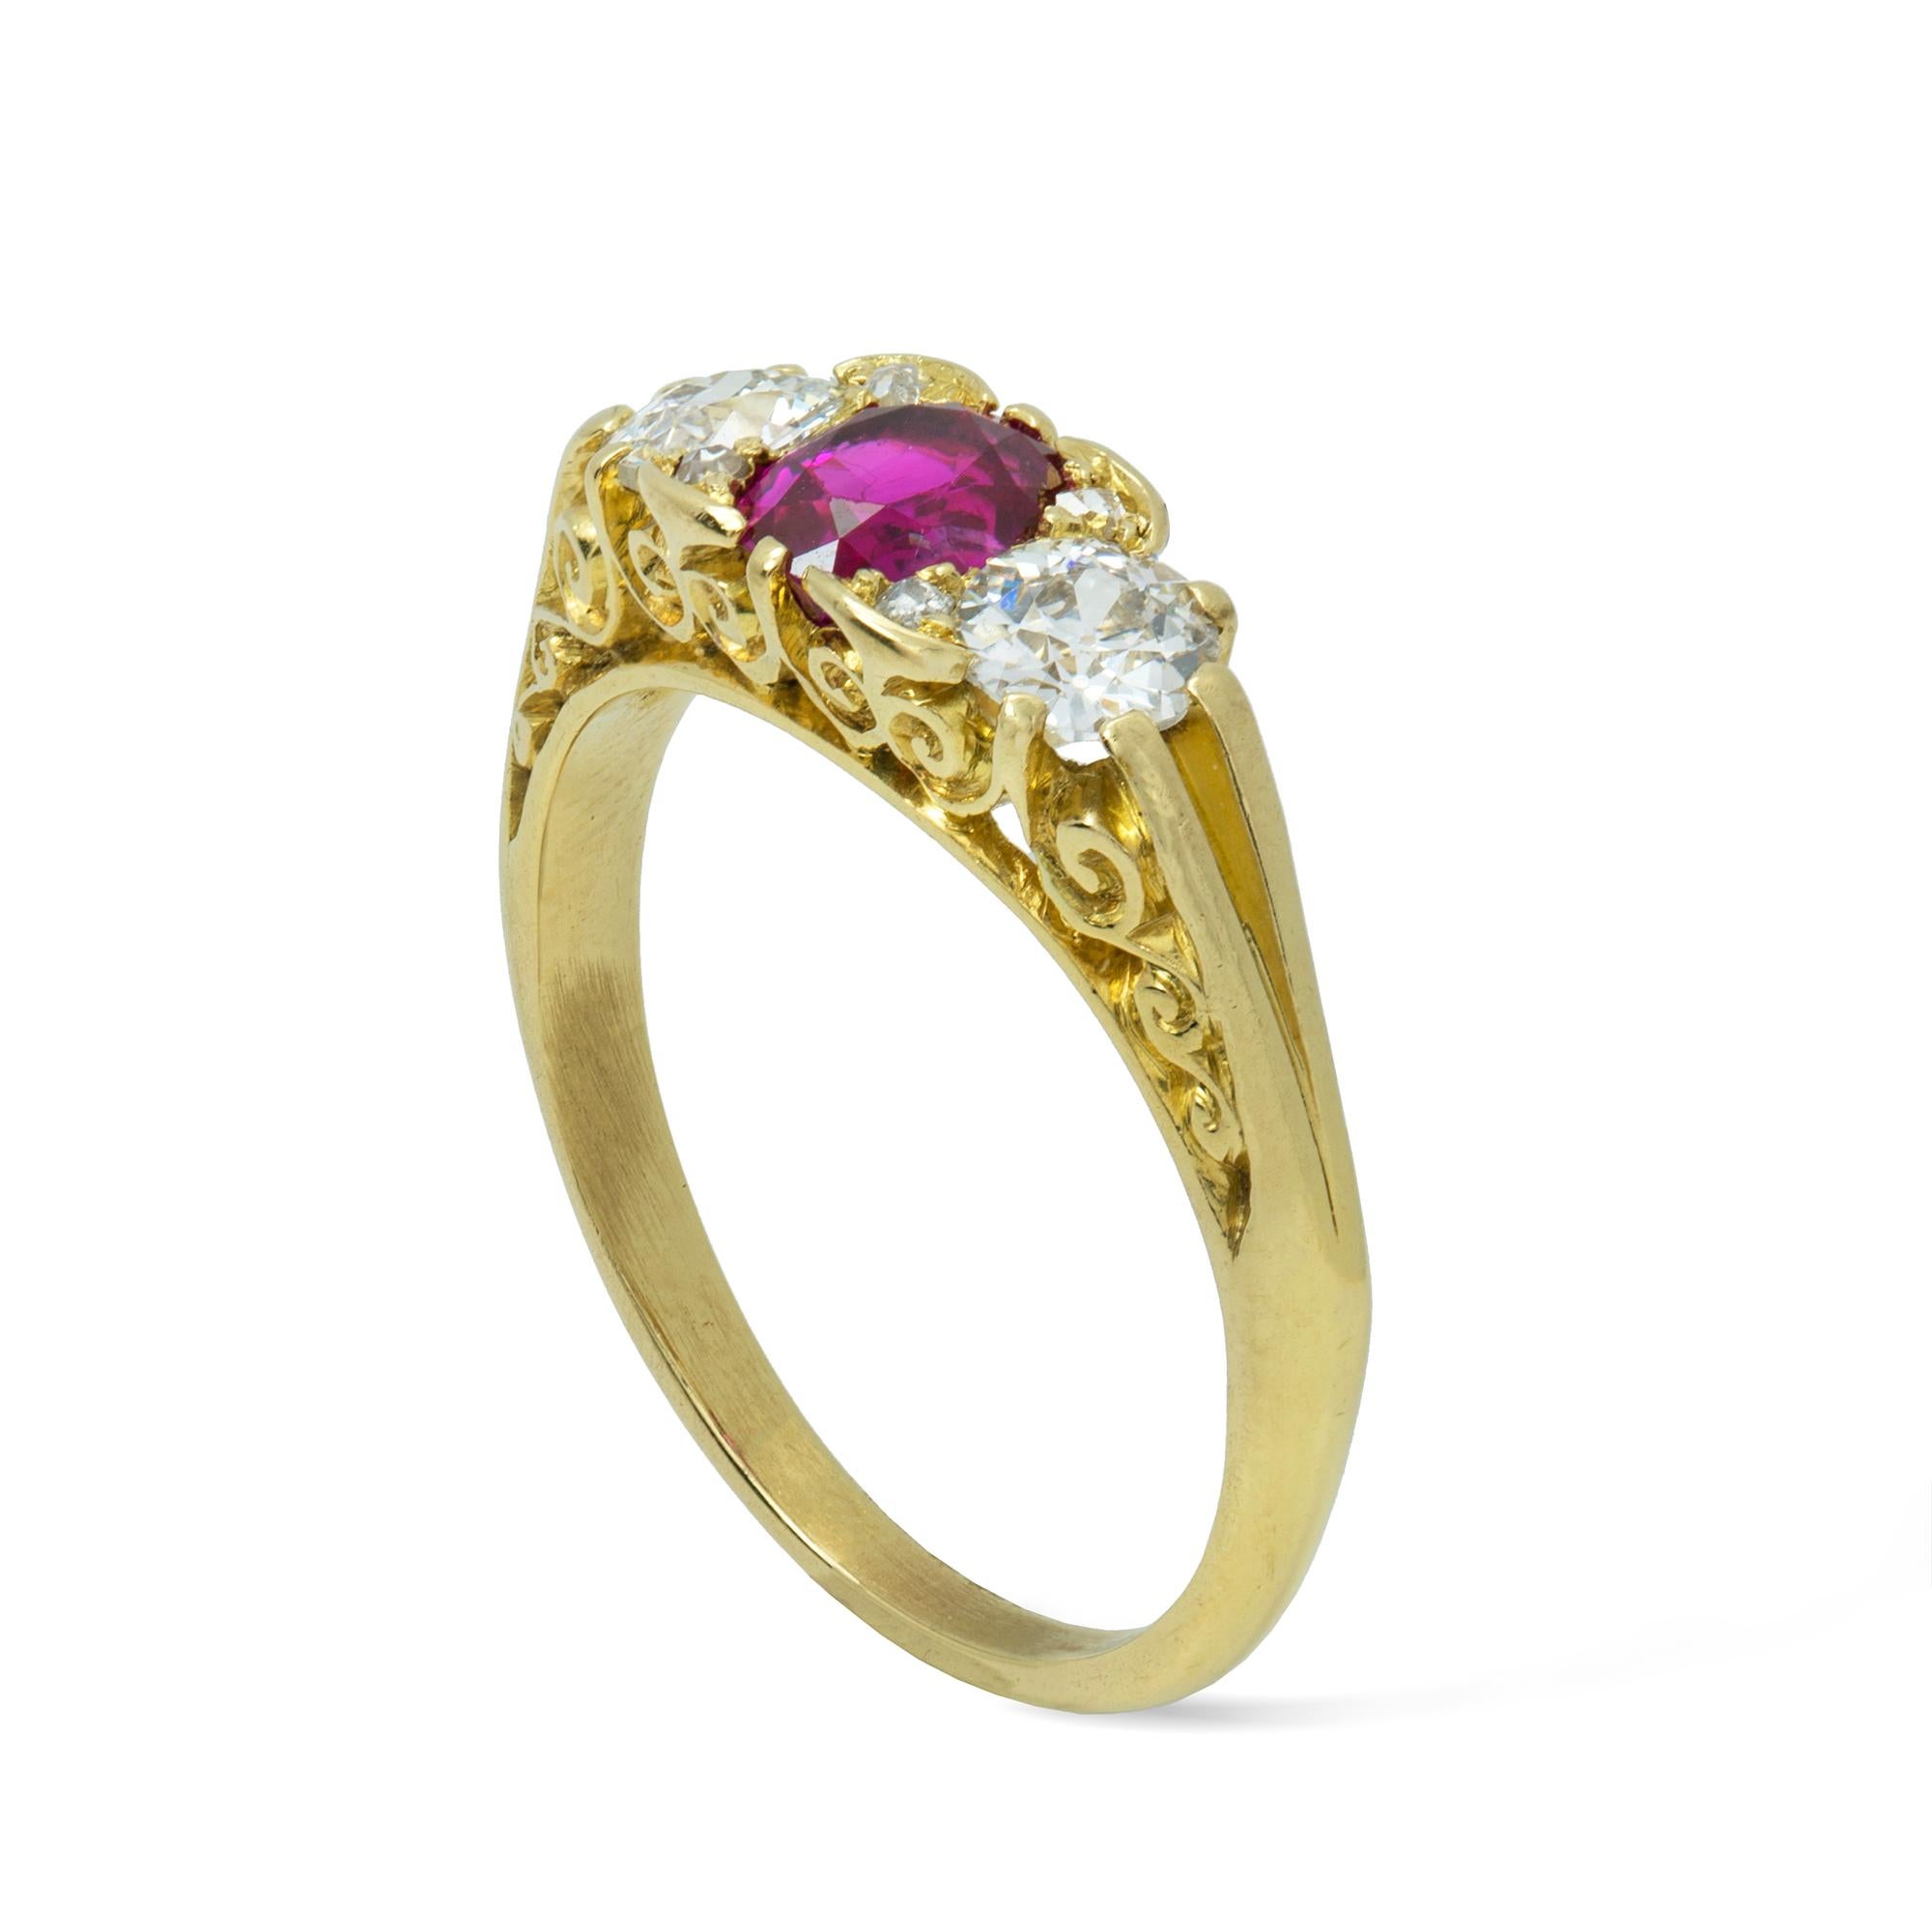 A three stone carved half loop ruby and diamond ring, the oval faceted ruby weighing an estimated 0.60 carats set between two old brilliant-cut diamonds weighing approximately 0.8 carats in total all to a scrolled pierced yellow gold mount,  circa